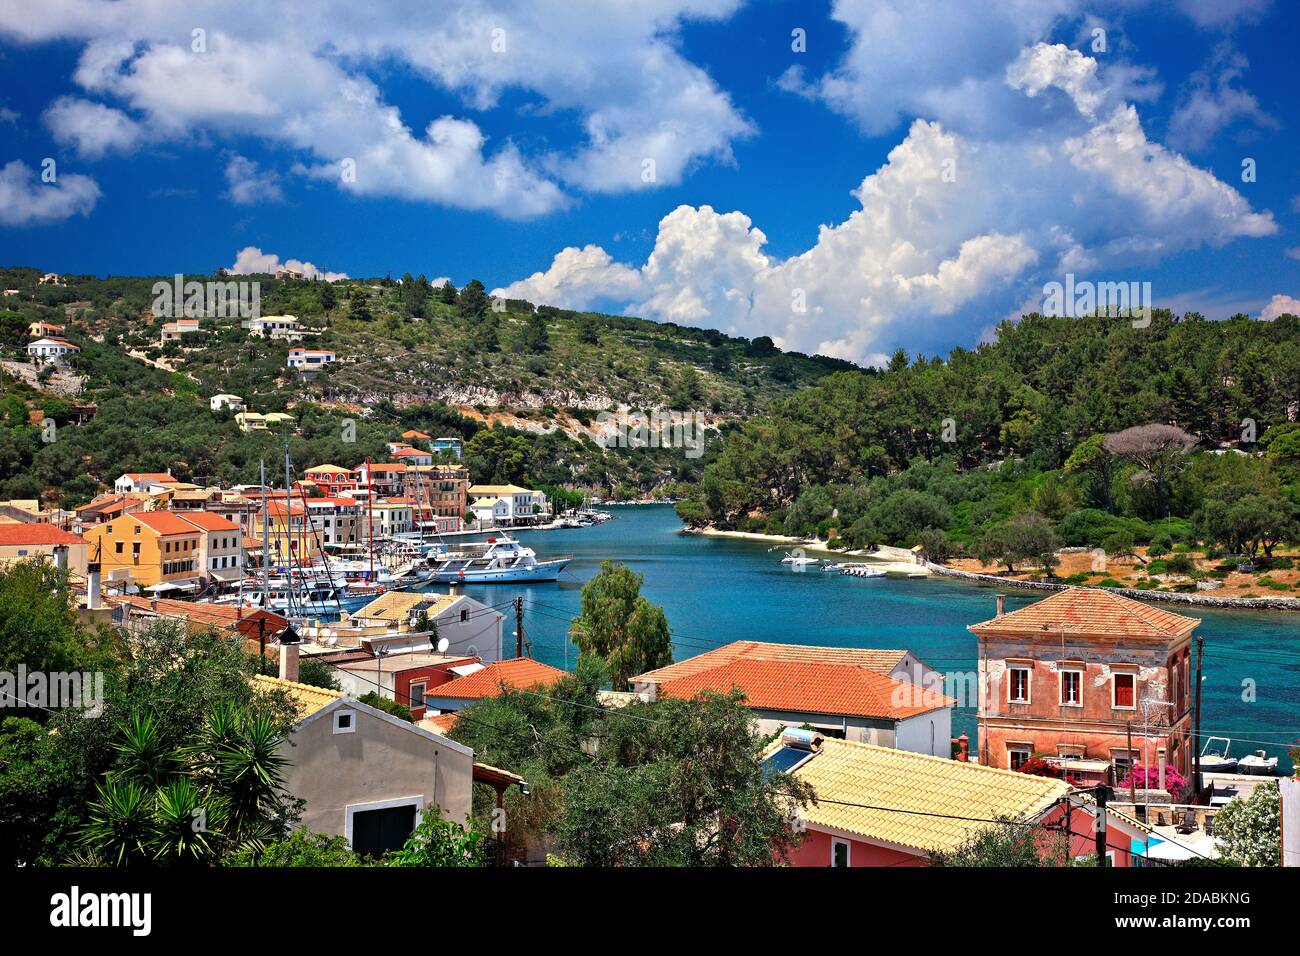 Gaios, the 'capital' of Paxos (or 'Paxi') island, the islet of Aghios Nikolaos  and the beautiful canal between them. Ionian Sea, Greece. Stock Photo